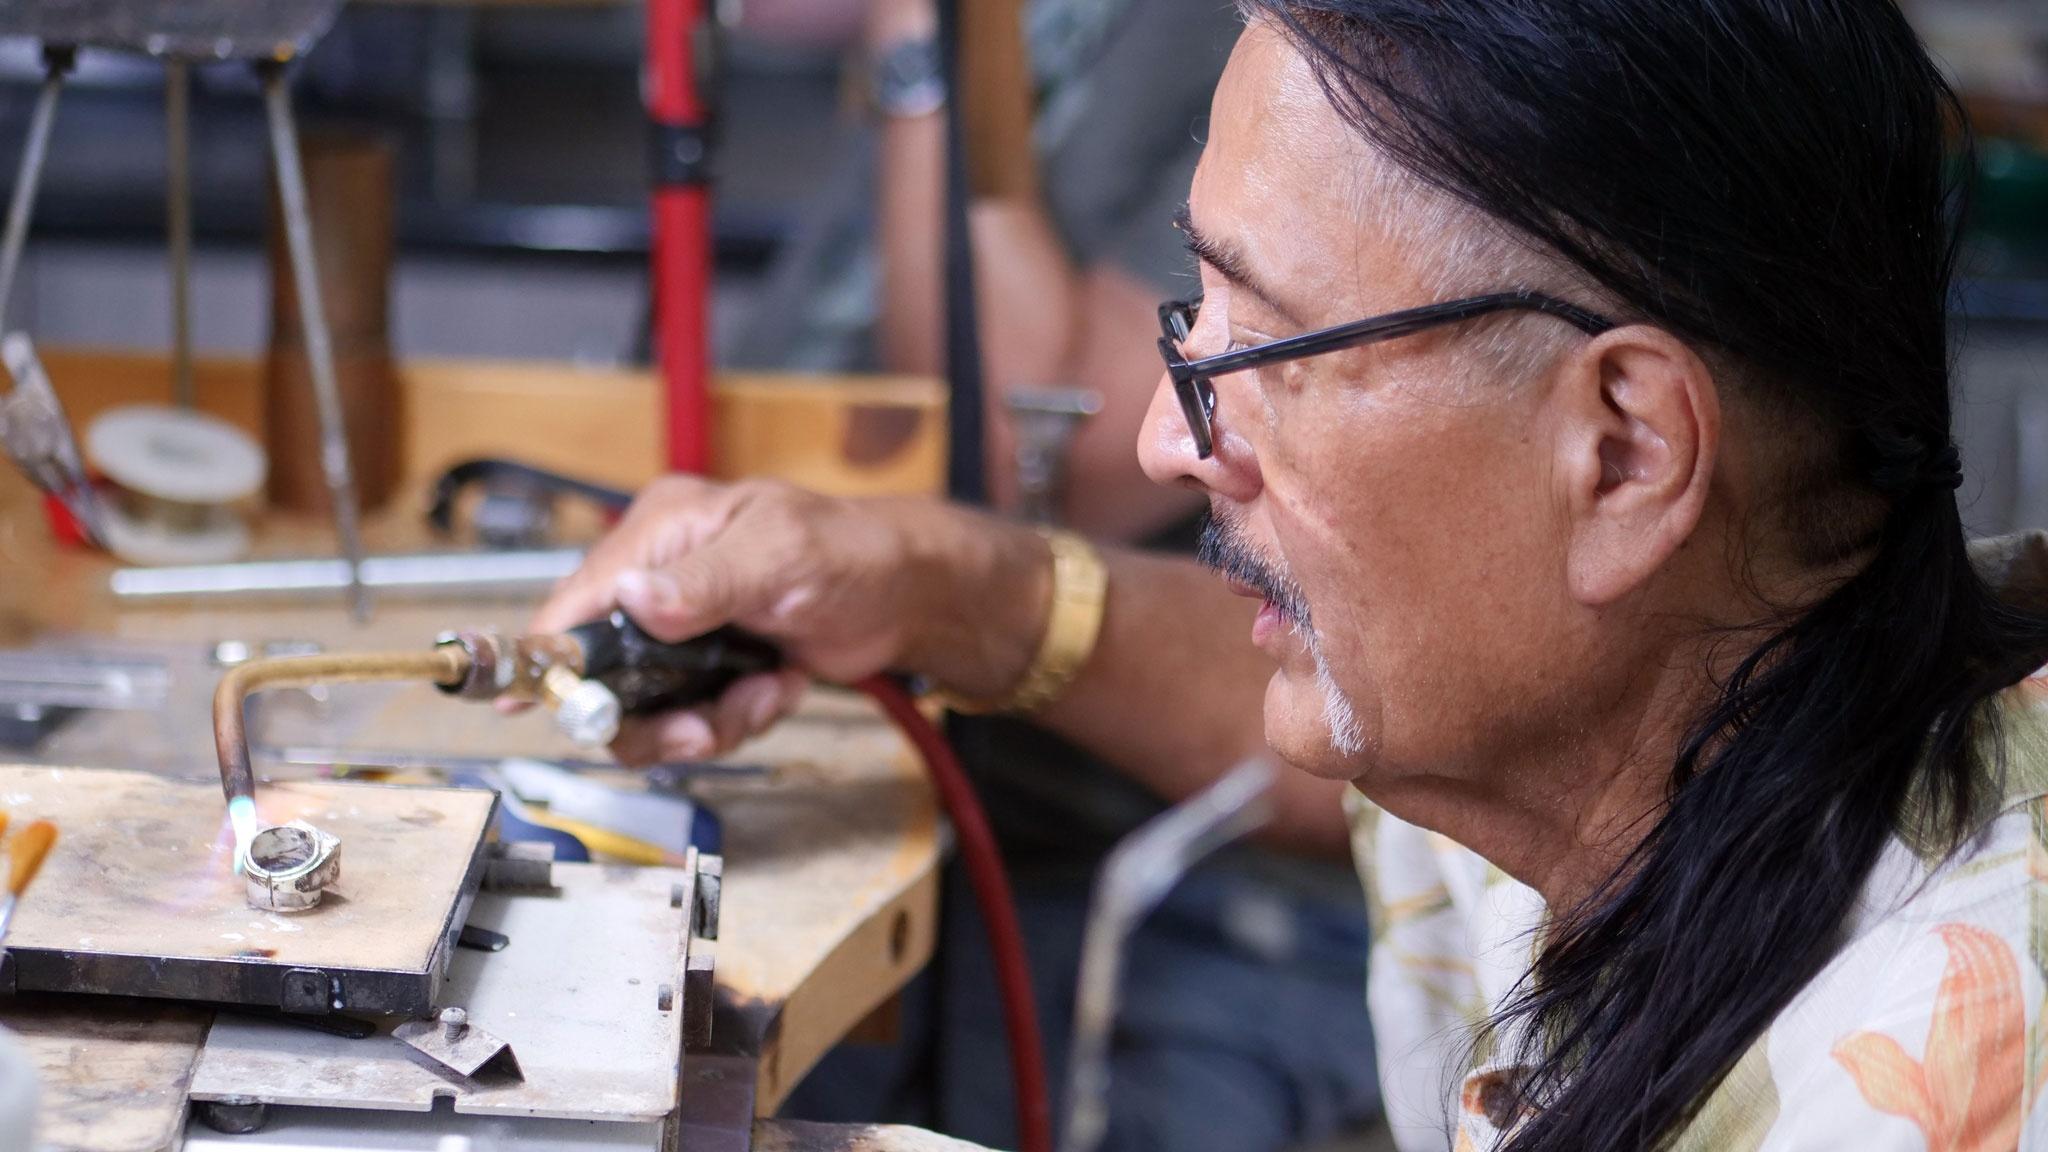 Navajo/Hopi jeweler Jesse Monongya featured in the JEWELRY episode streaming on PBS Video App Nov 4